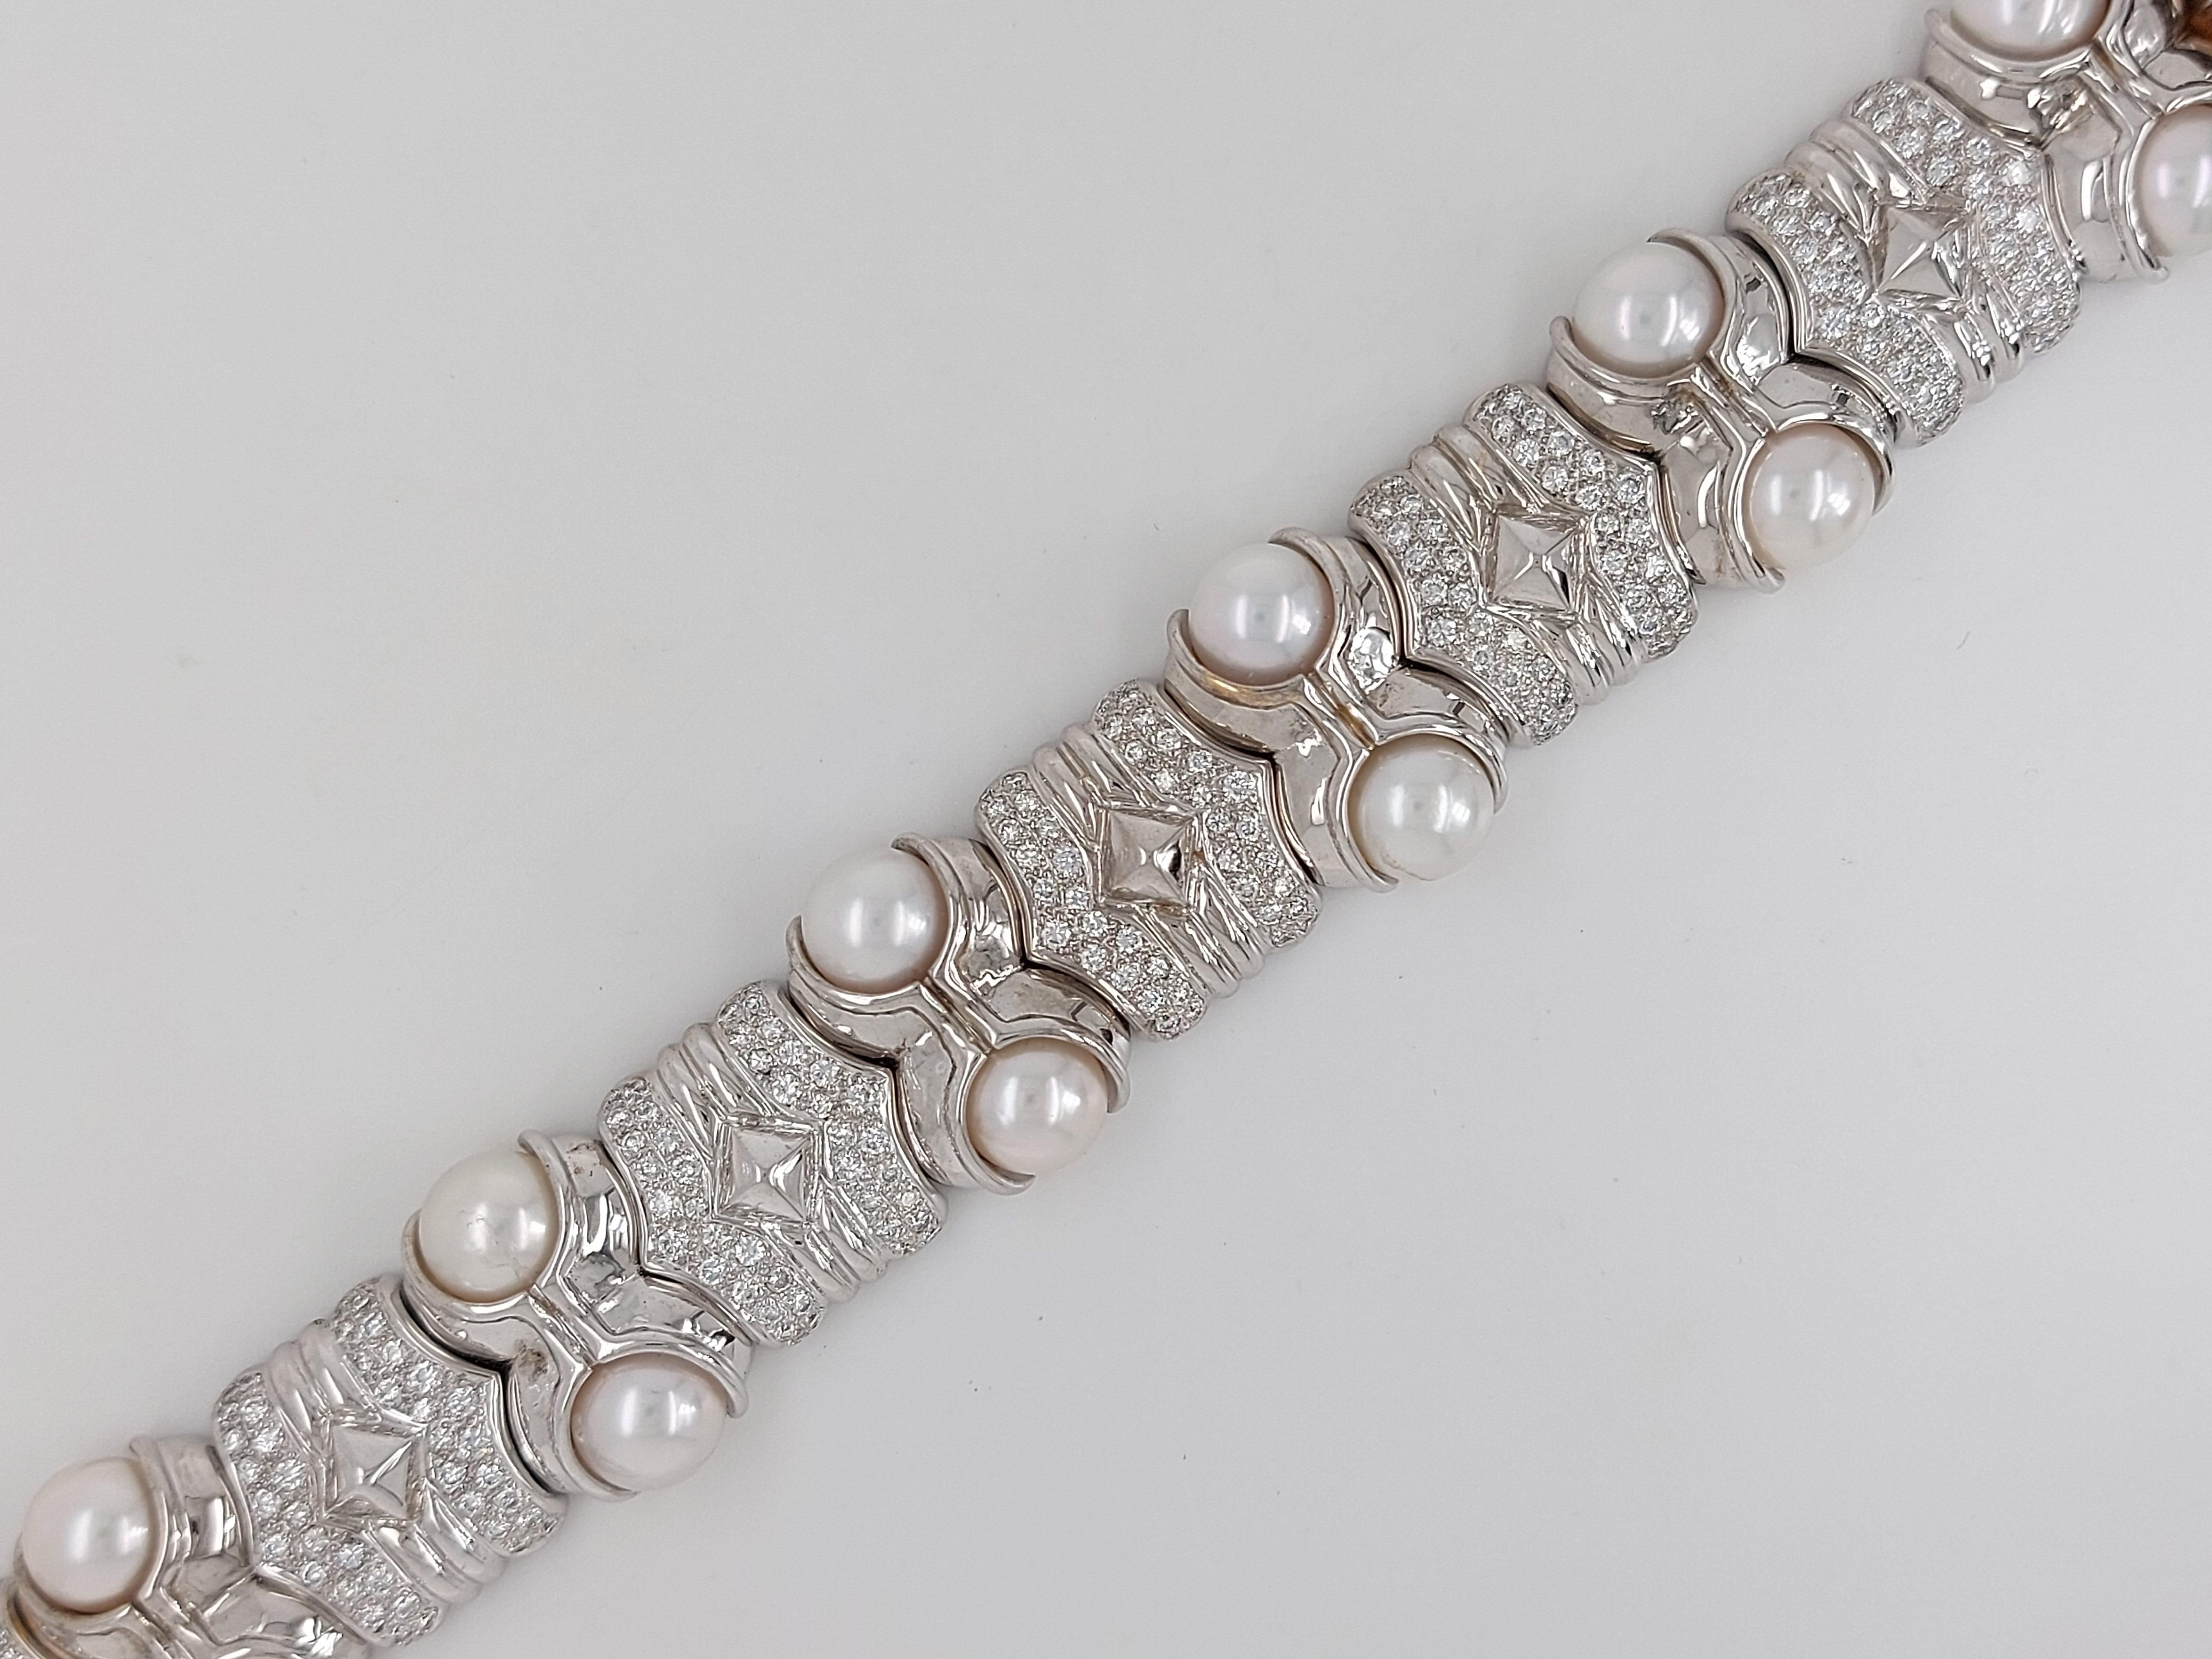 18 Karat White Gold Bracelet with Brilliant Cut Diamonds and Pearls For Sale 5